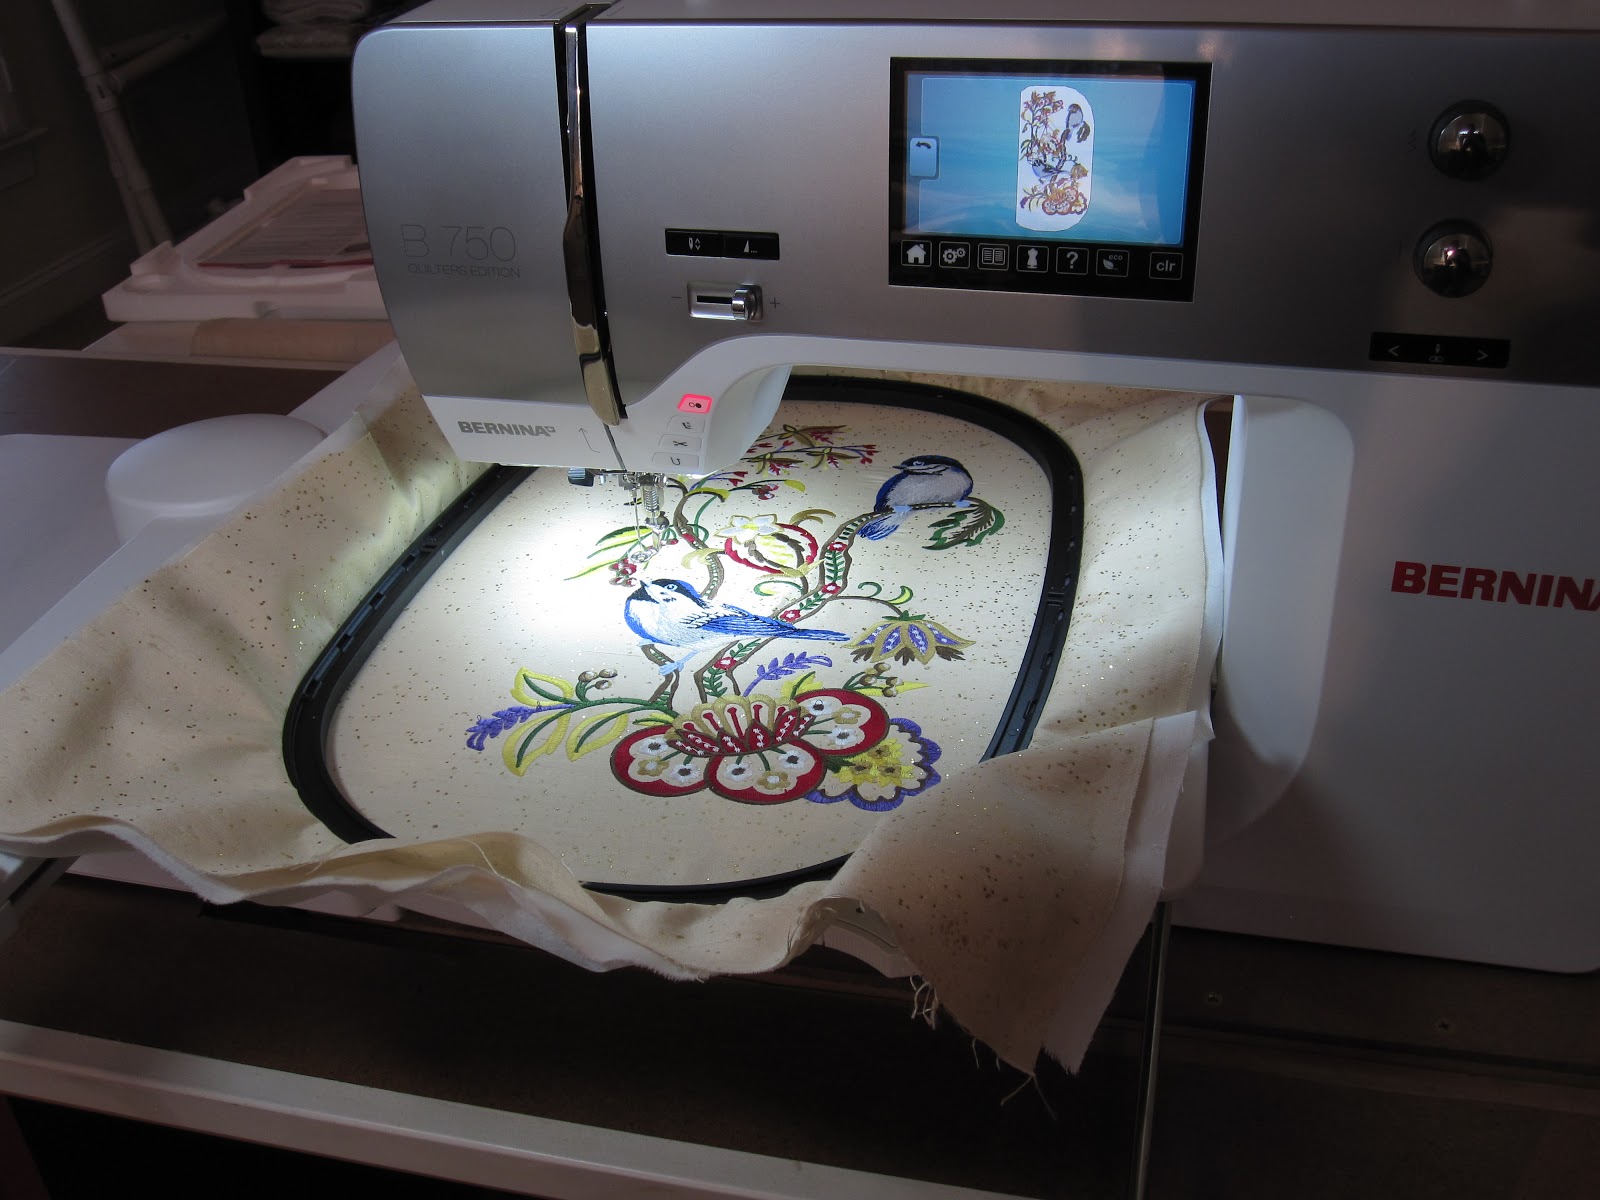 40 Weight Thread: The Embroidery Mystery Unraveled!